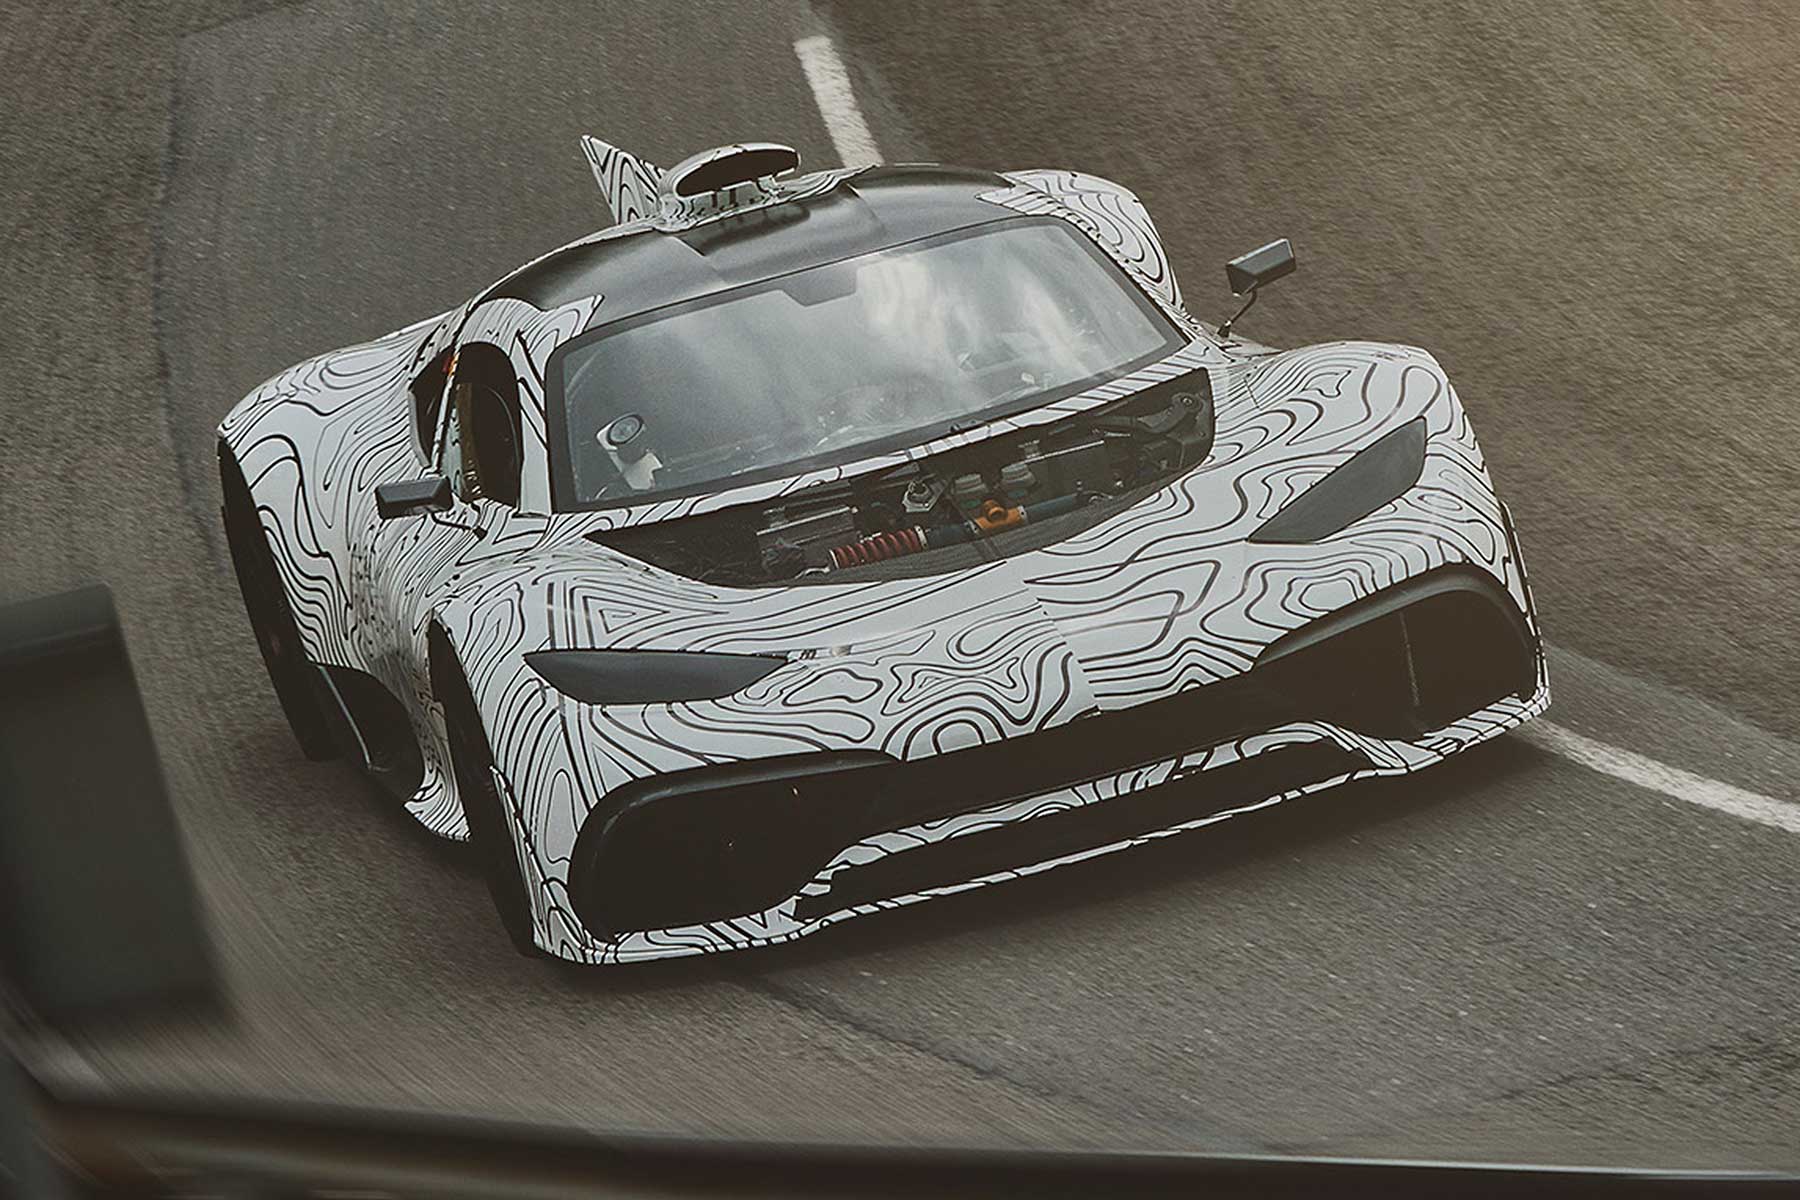 Mercedes-AMG Project One prototype